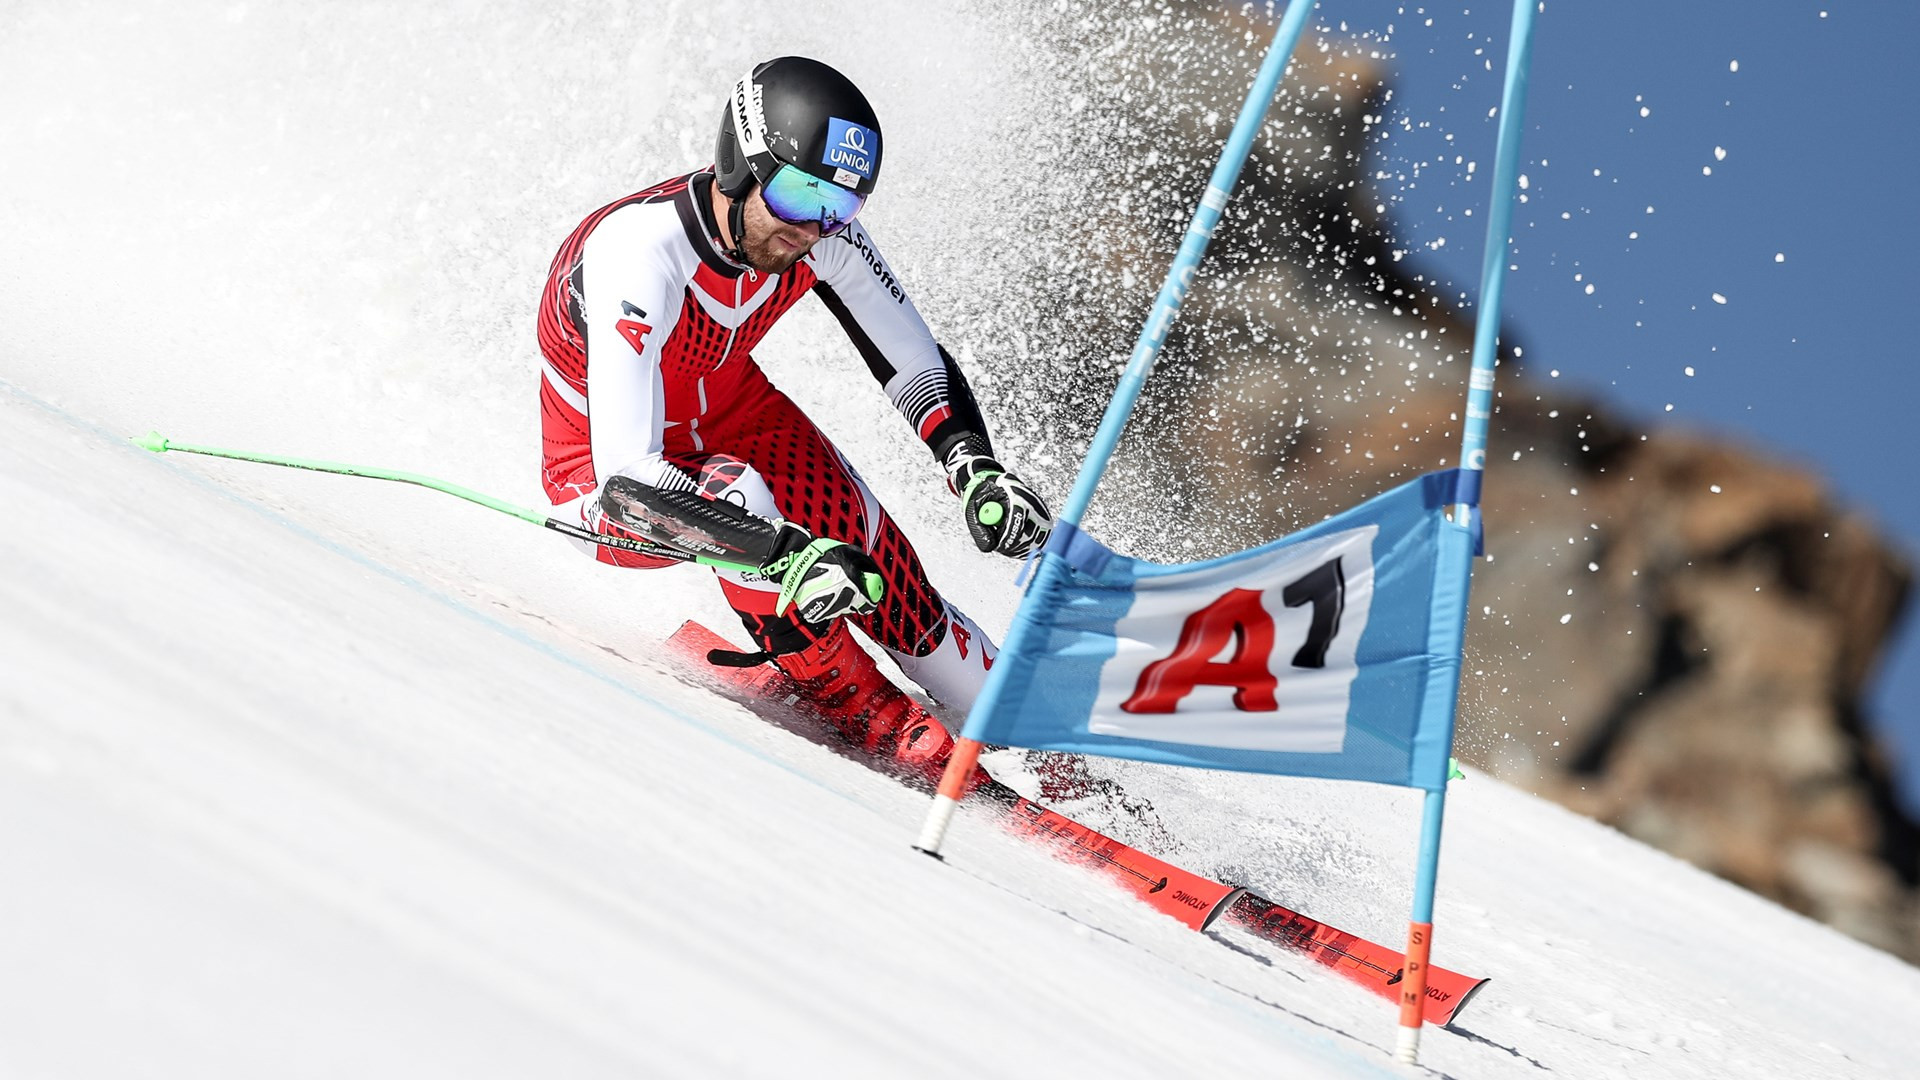 Exclusive training session held for Austrians a month before Ski World Cup